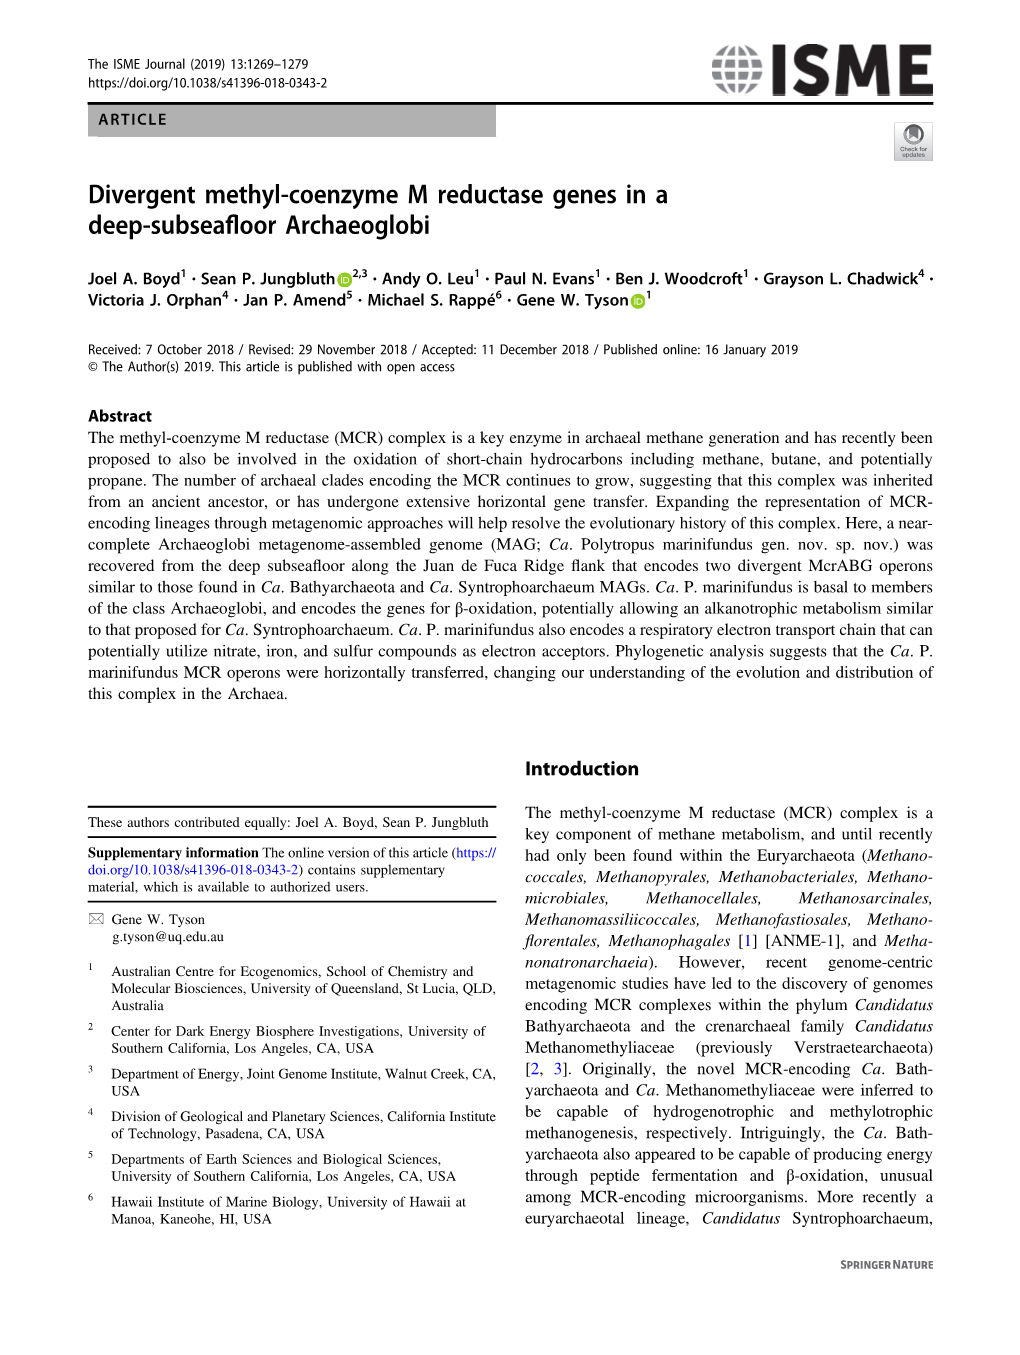 Divergent Methyl-Coenzyme M Reductase Genes in a Deep-Subseaﬂoor Archaeoglobi